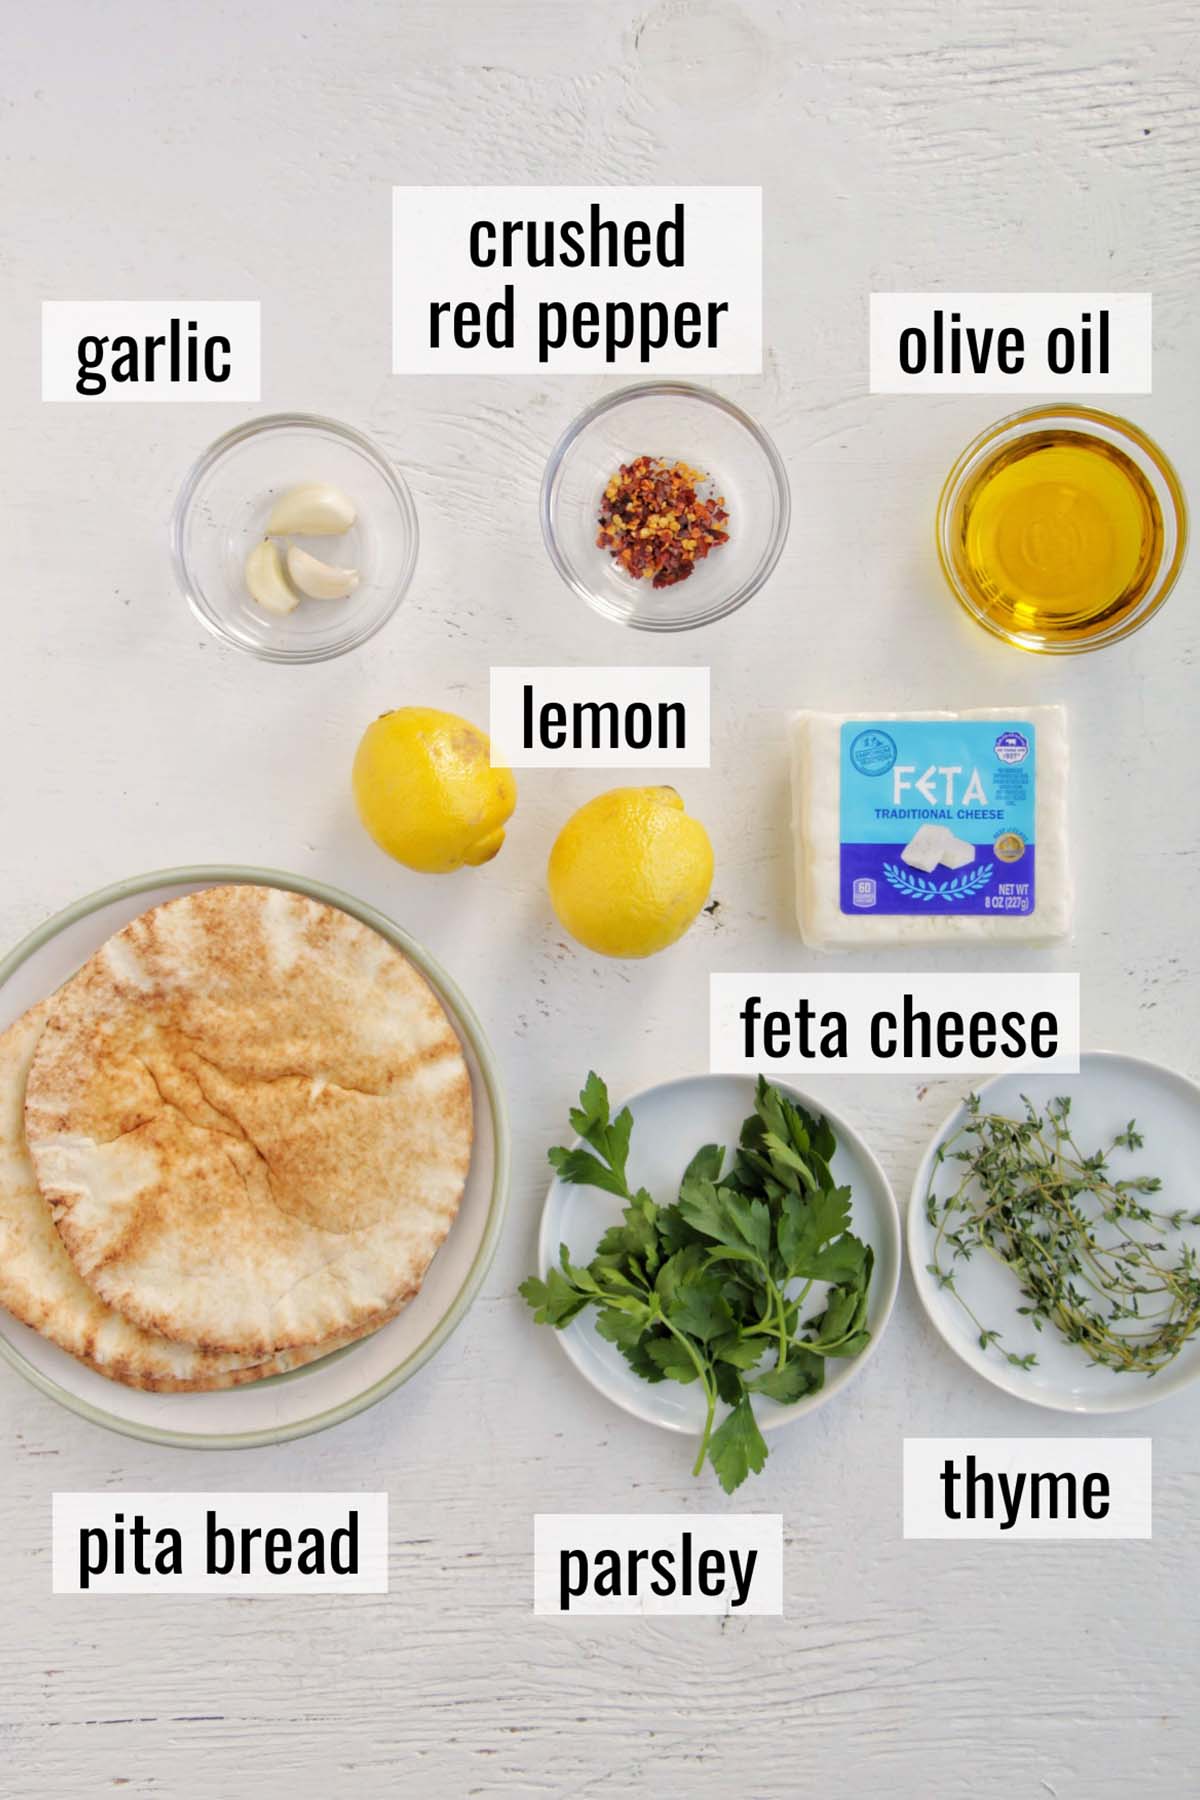 marinated feta cheese ingredients with labels.